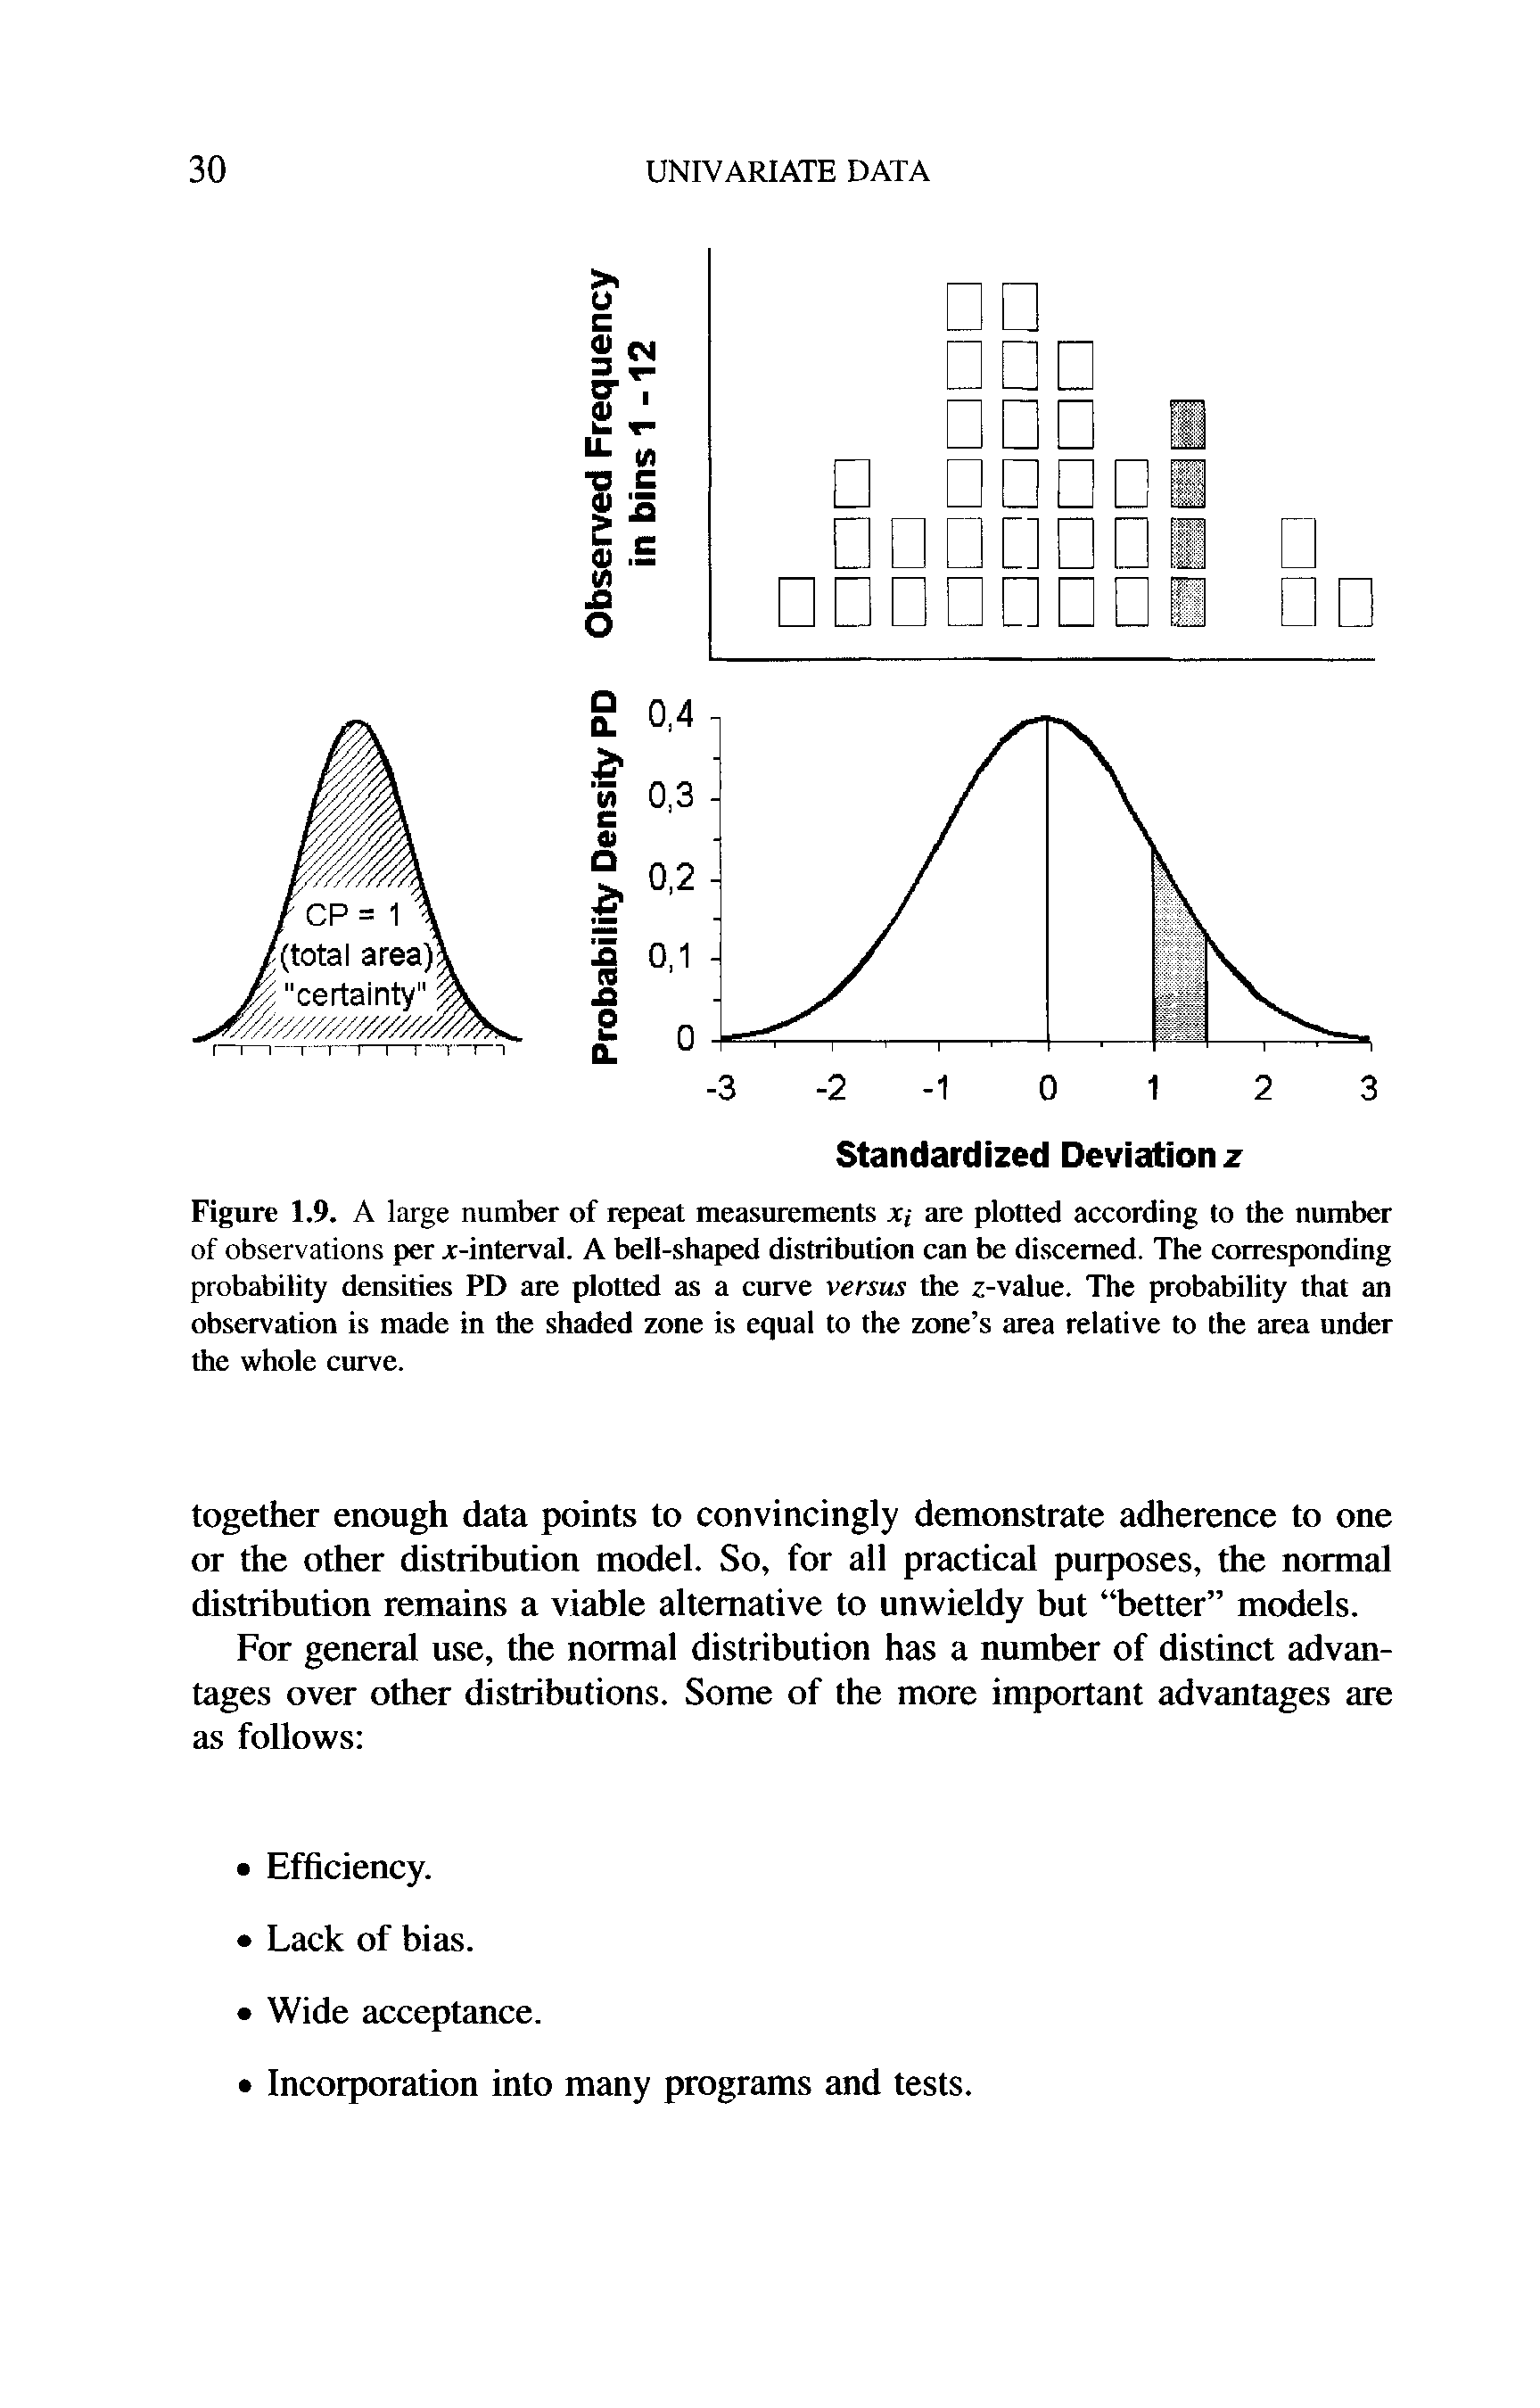 Figure 1.9. A large number of repeat measurements x,- are plotted according to the number of observations per x-interval. A bell-shaped distribution can be discerned. The corresponding probability densities PD are plotted as a curve versus the z-value. The probability that an observation is made in the shaded zone is equal to the zone s area relative to the area under the whole curve.